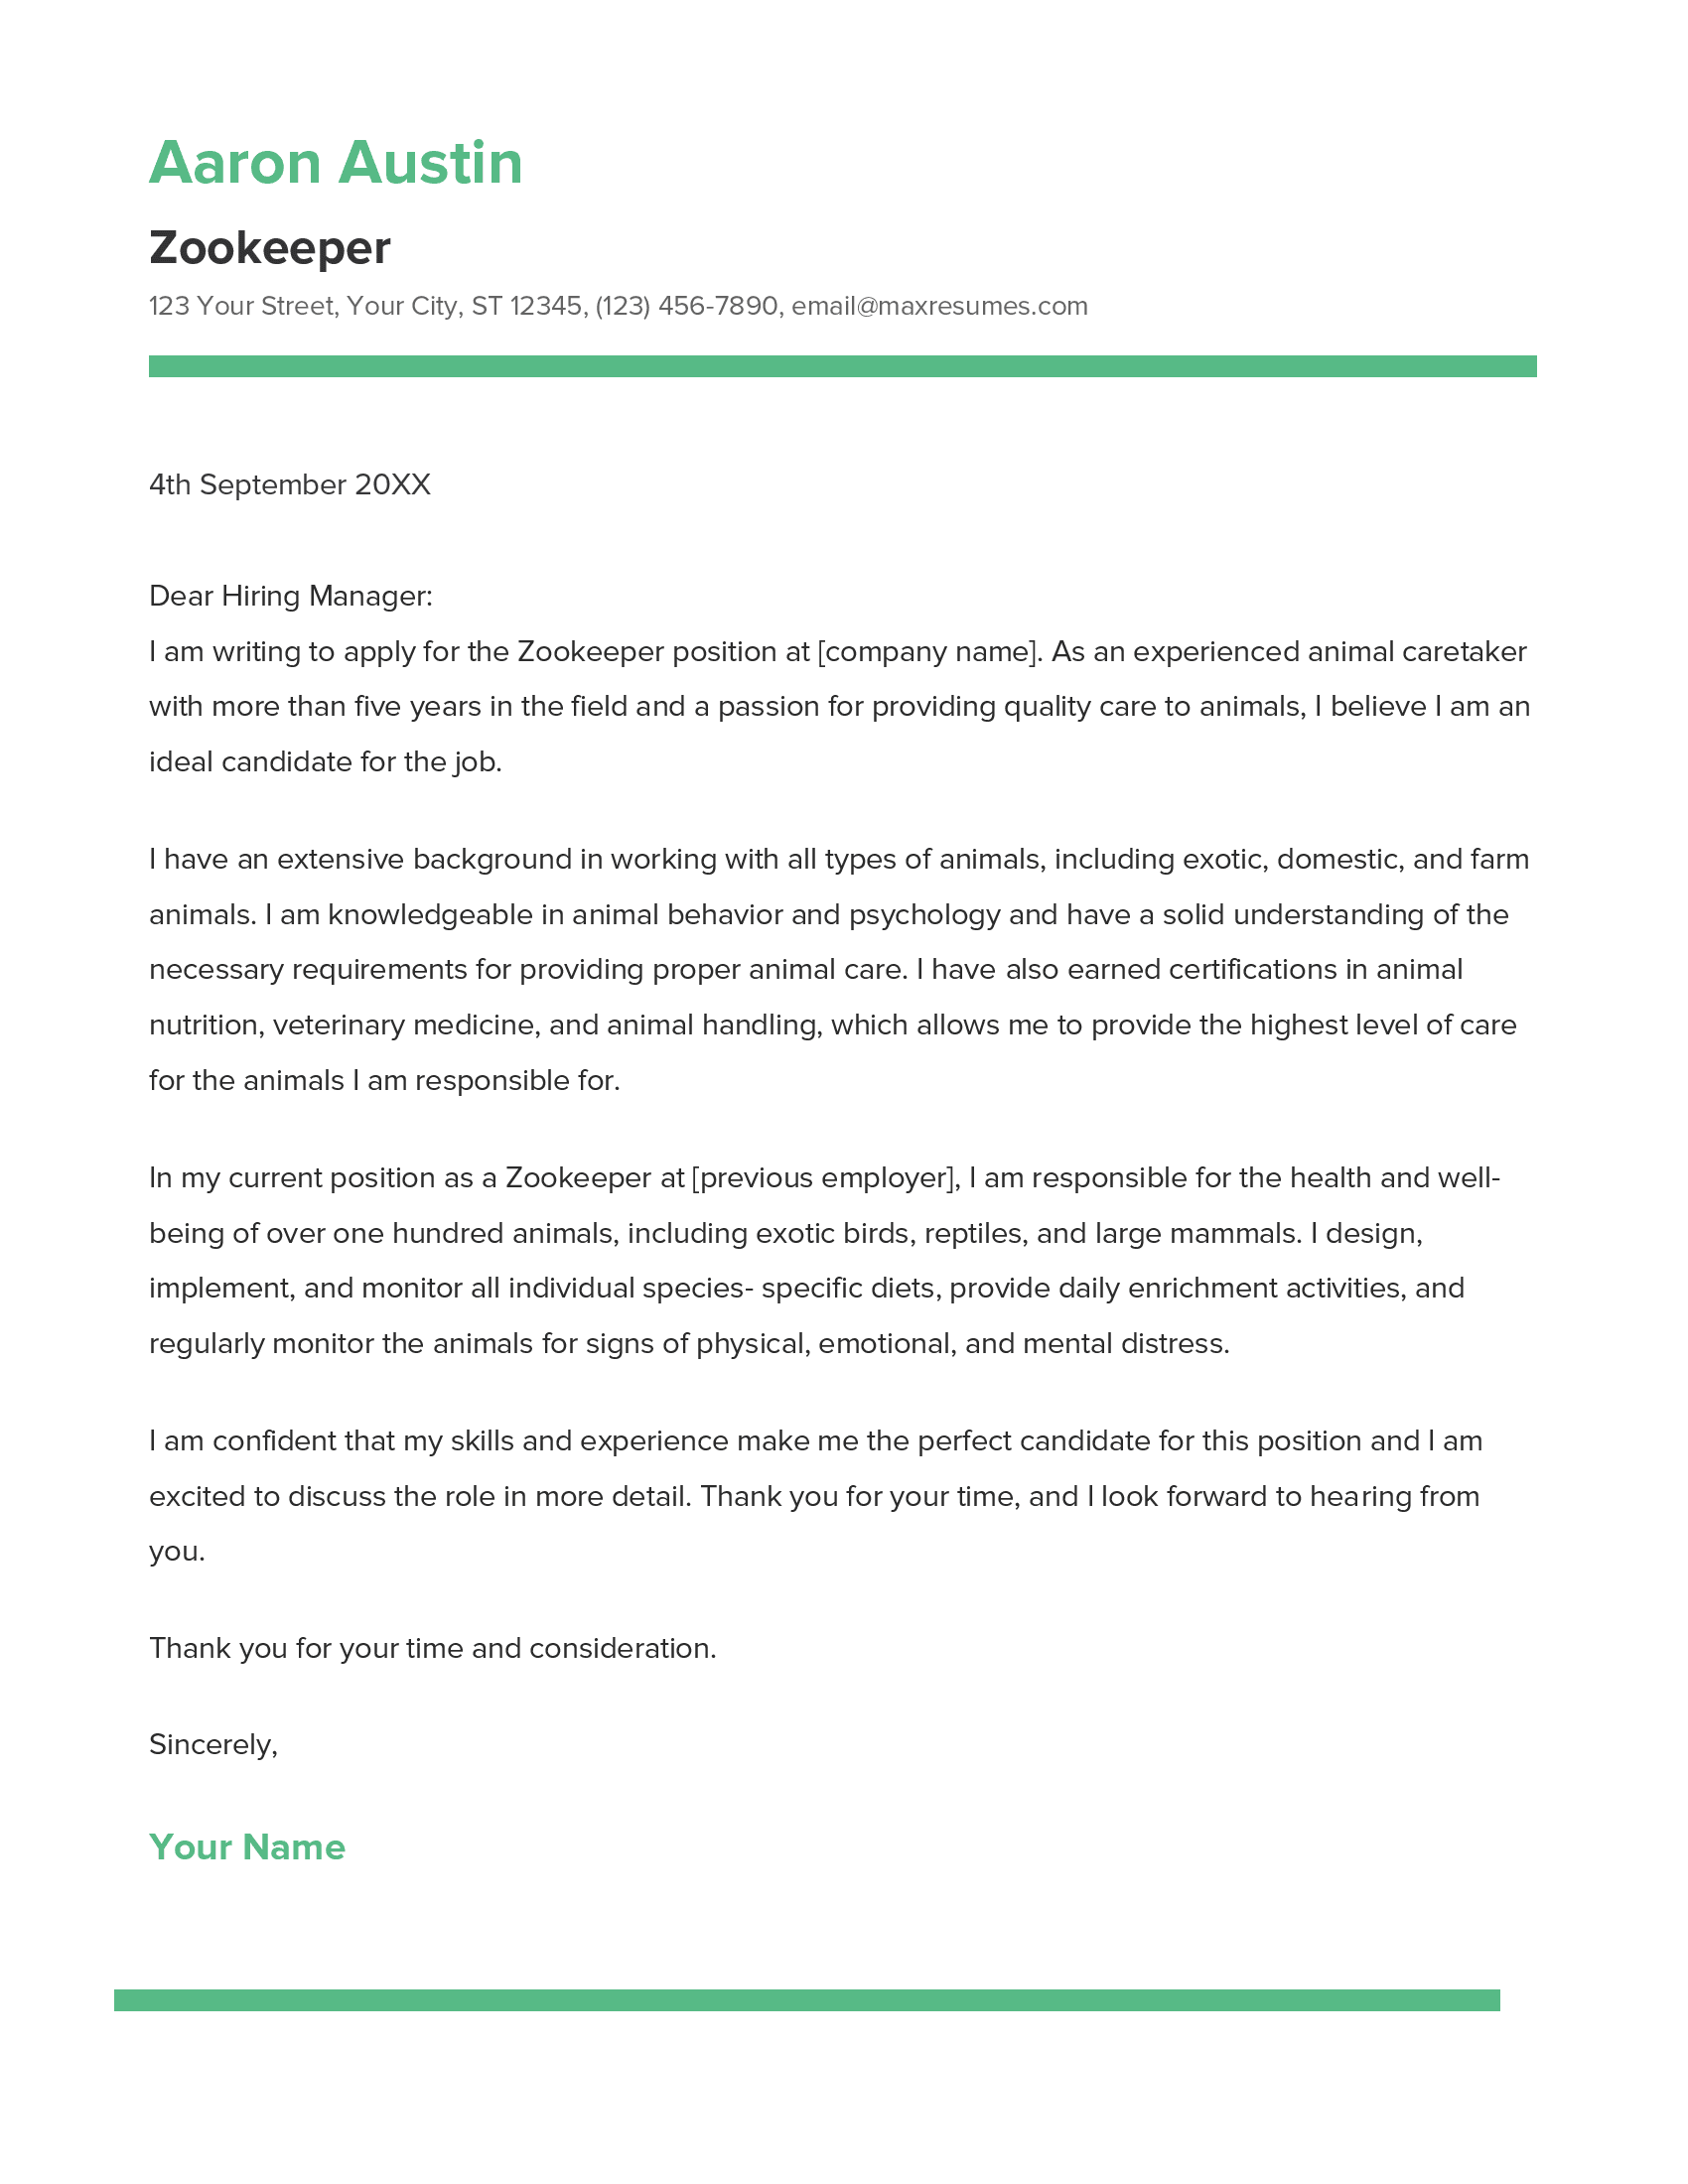 Zookeeper Cover Letter Example